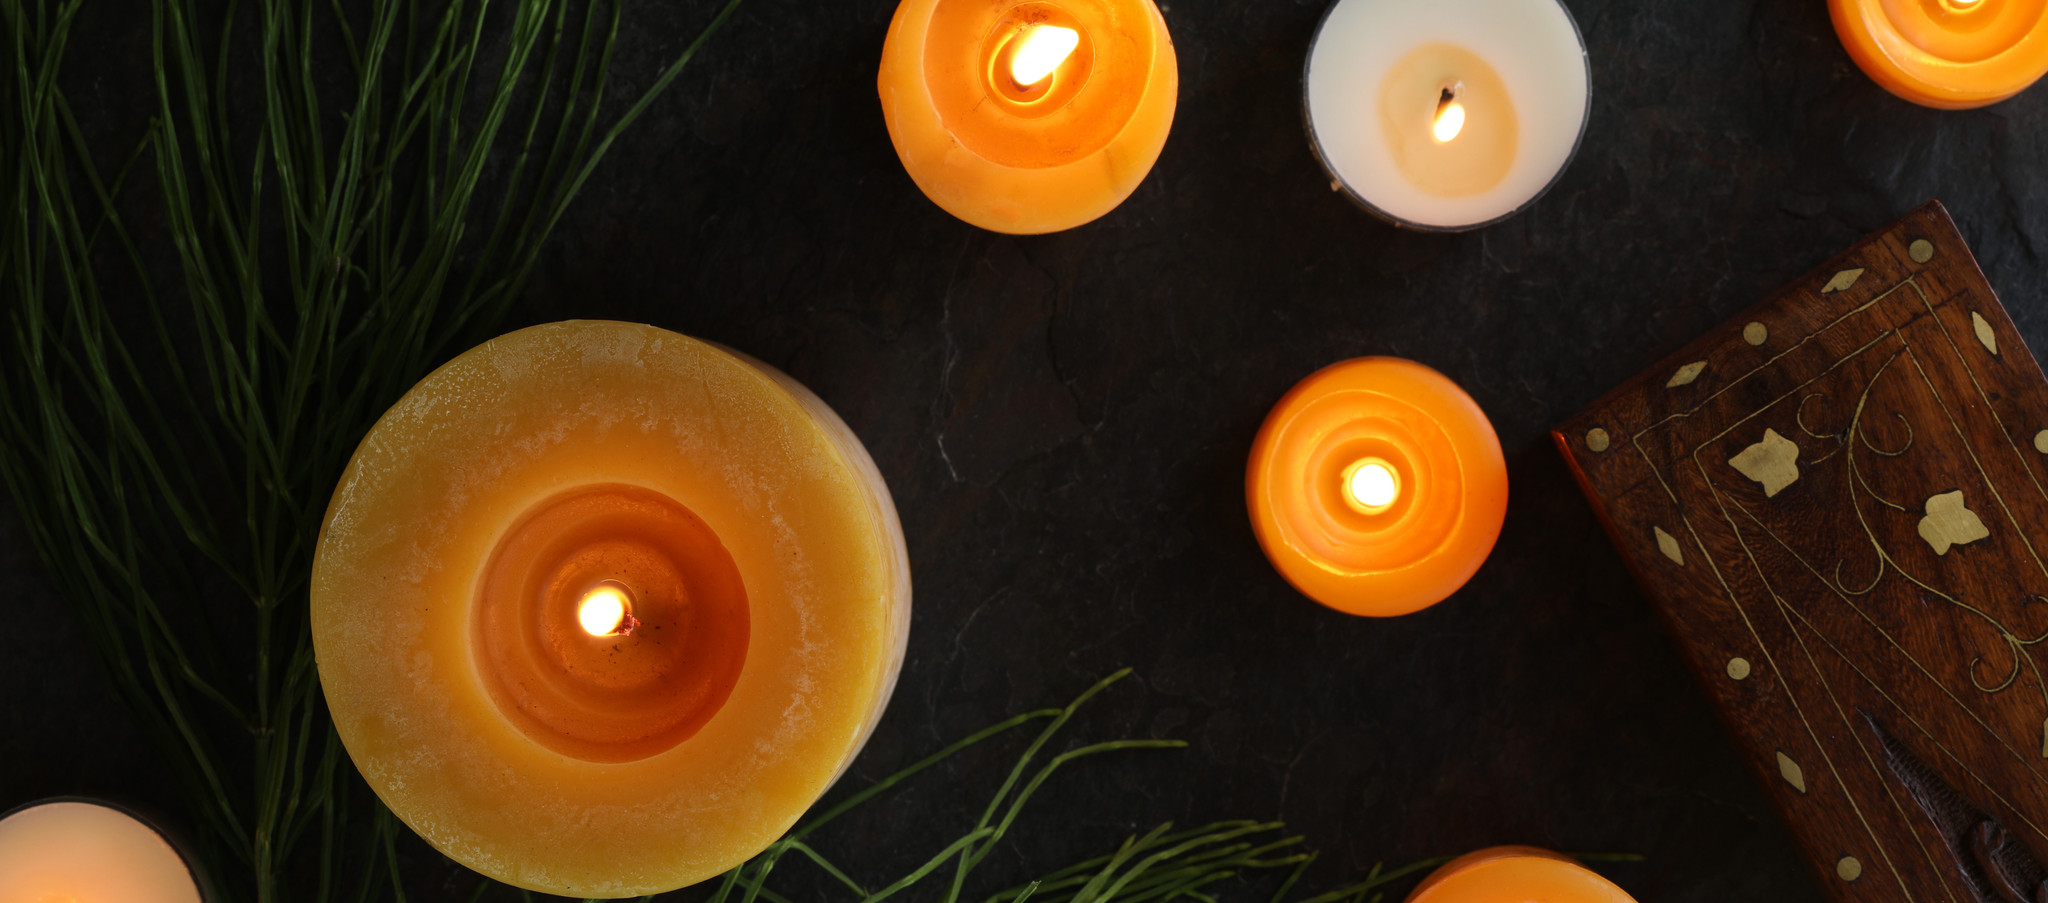 Beeswax & Soy Candles